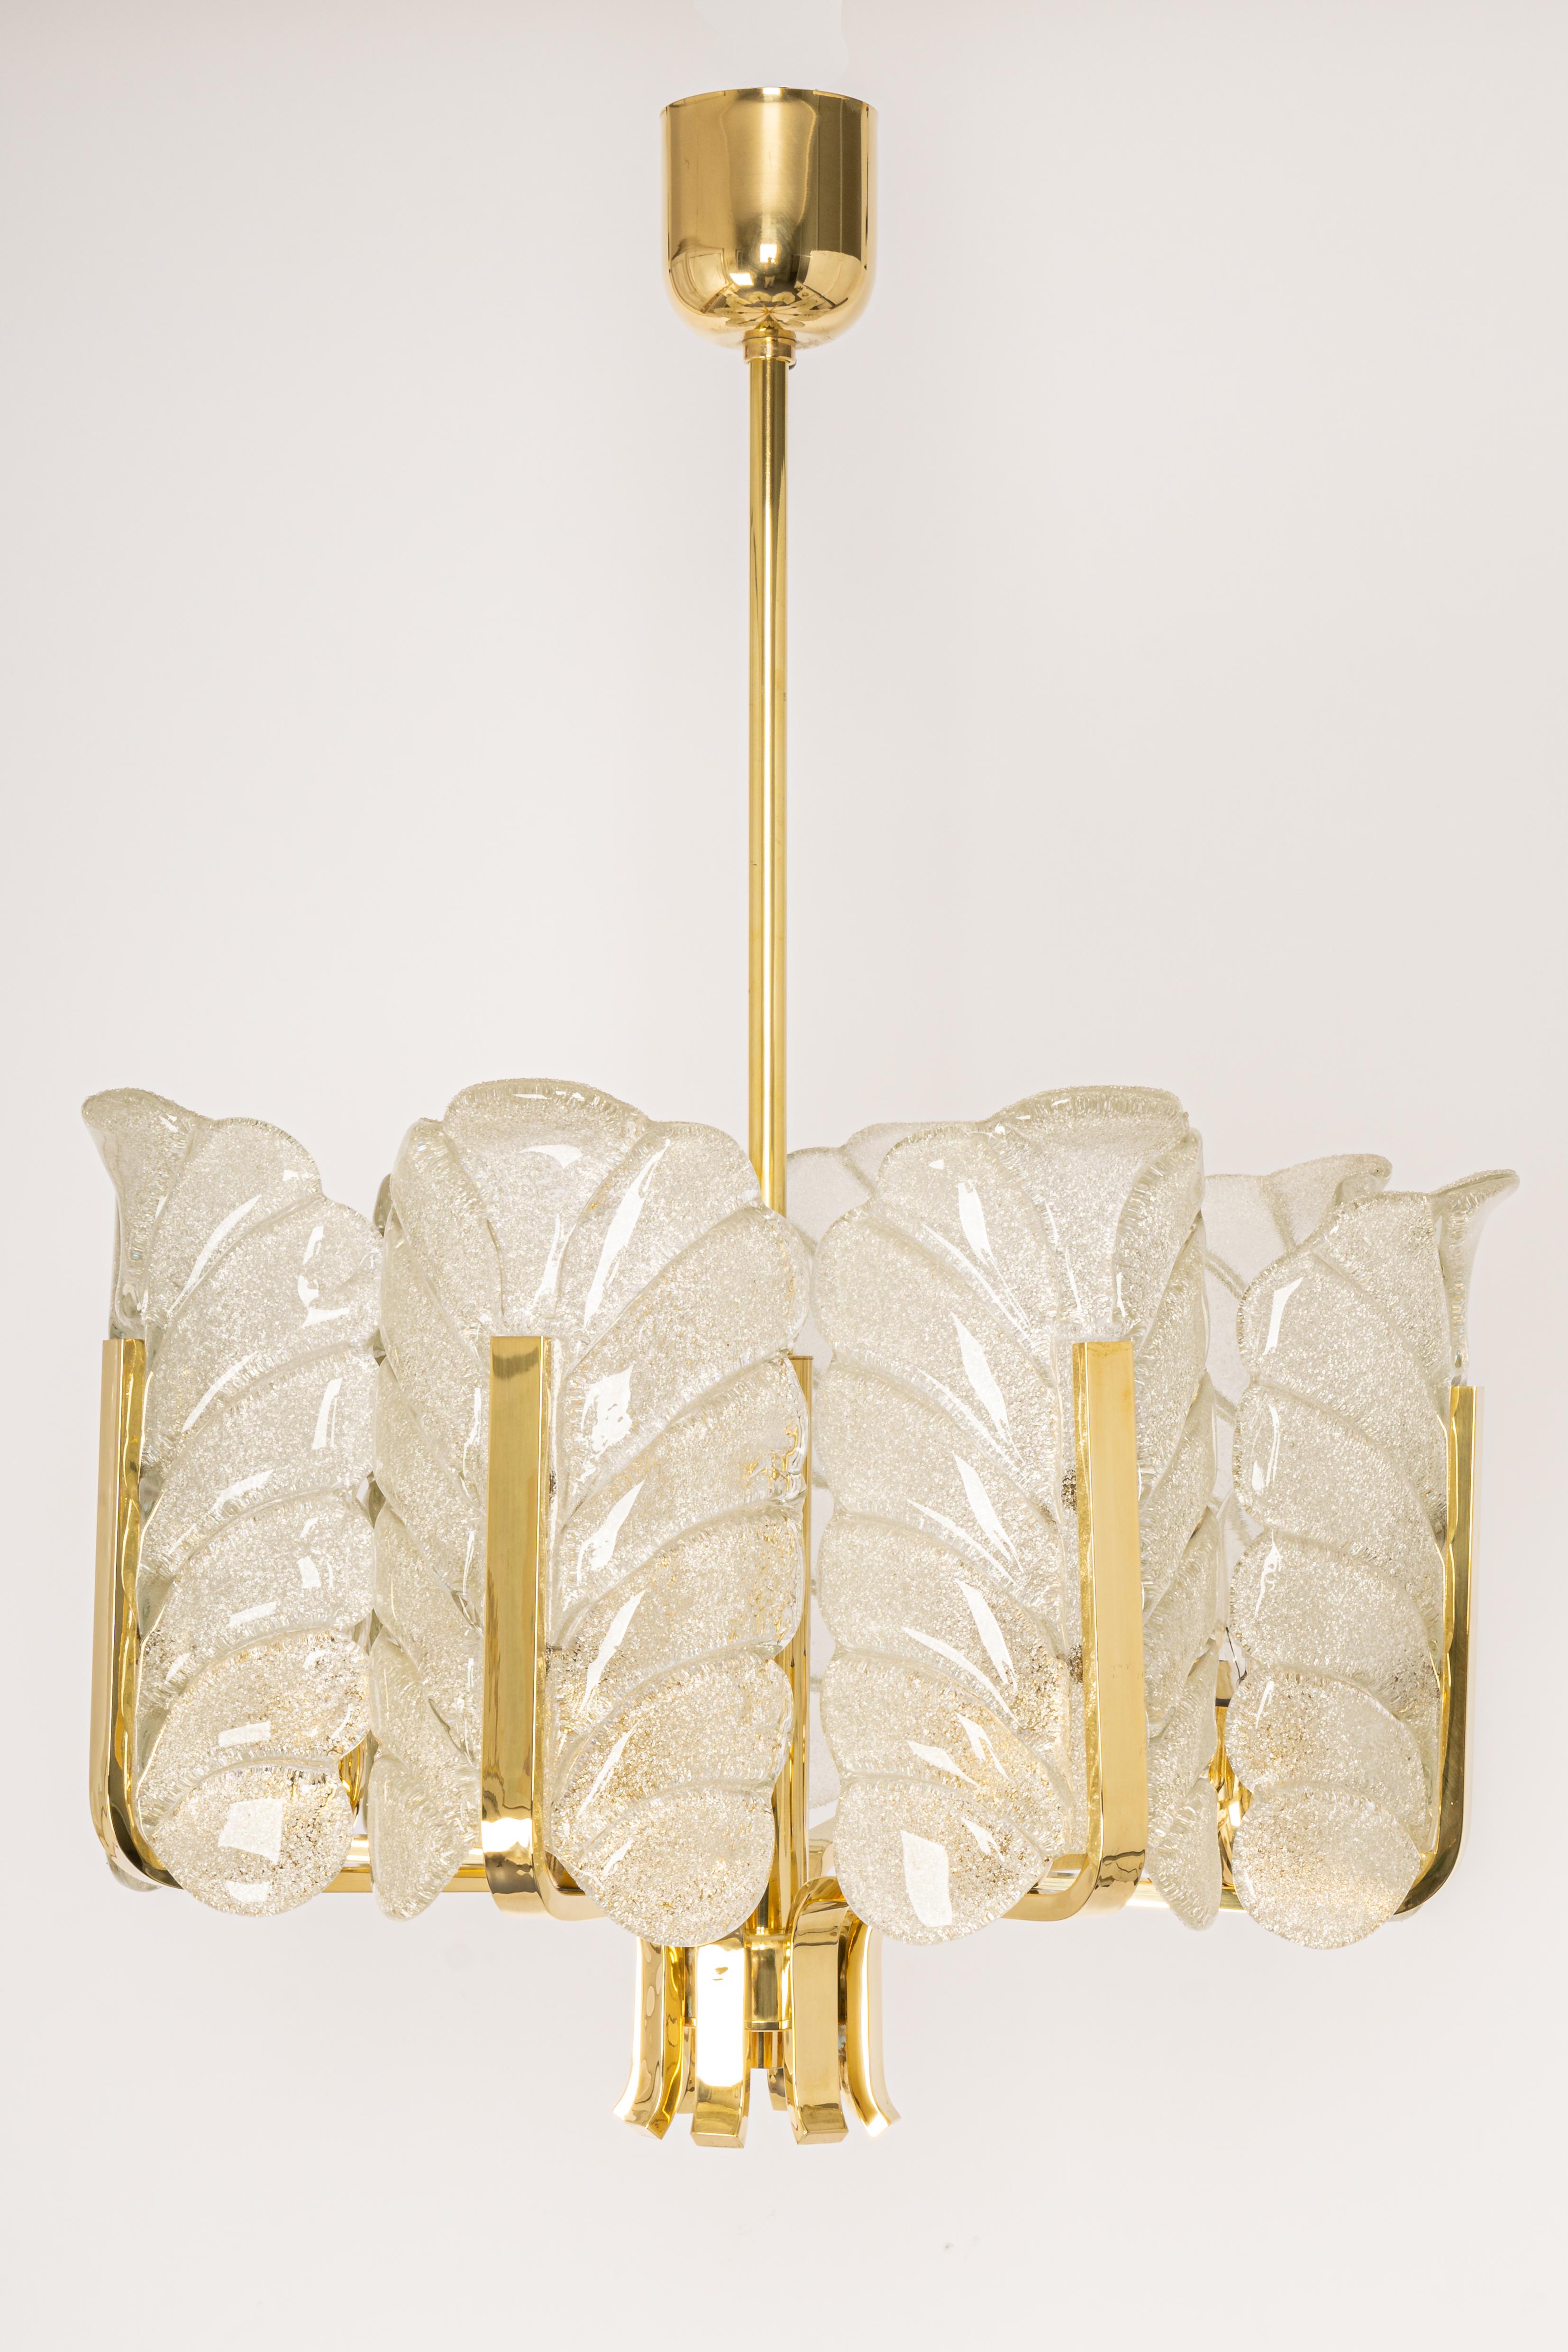 Very glamorous chandelier designed by Carl Fagerlund for Orrefors glass, Sweden, manufactured in midcentury, circa 1960-1969. The light features a polished brass frame with eight stunning murano glass leaves which have a matte frosted relief on the